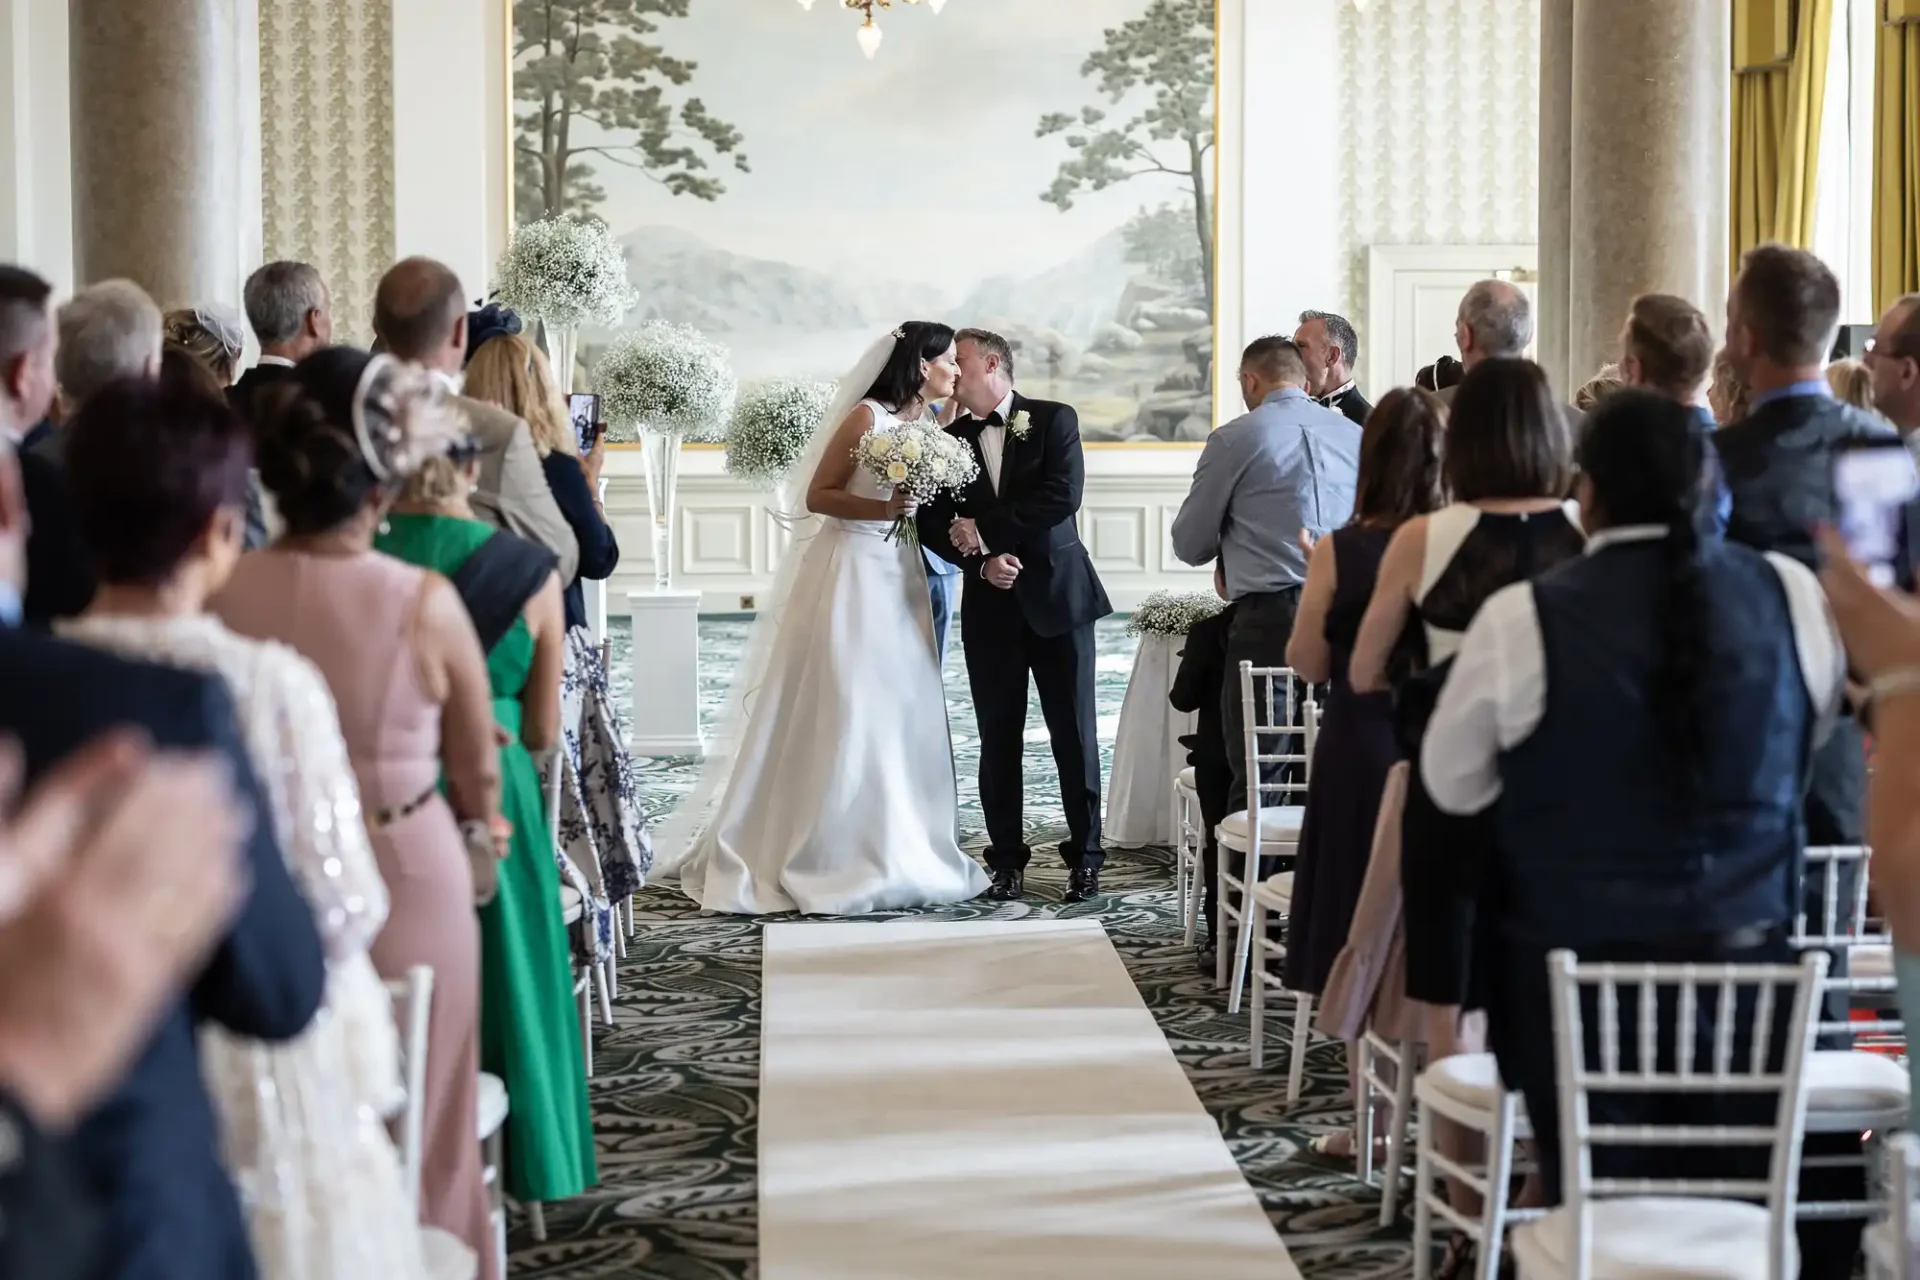 Bride and groom kissing at the altar in a grand room with large windows and guests standing around them, clapping.